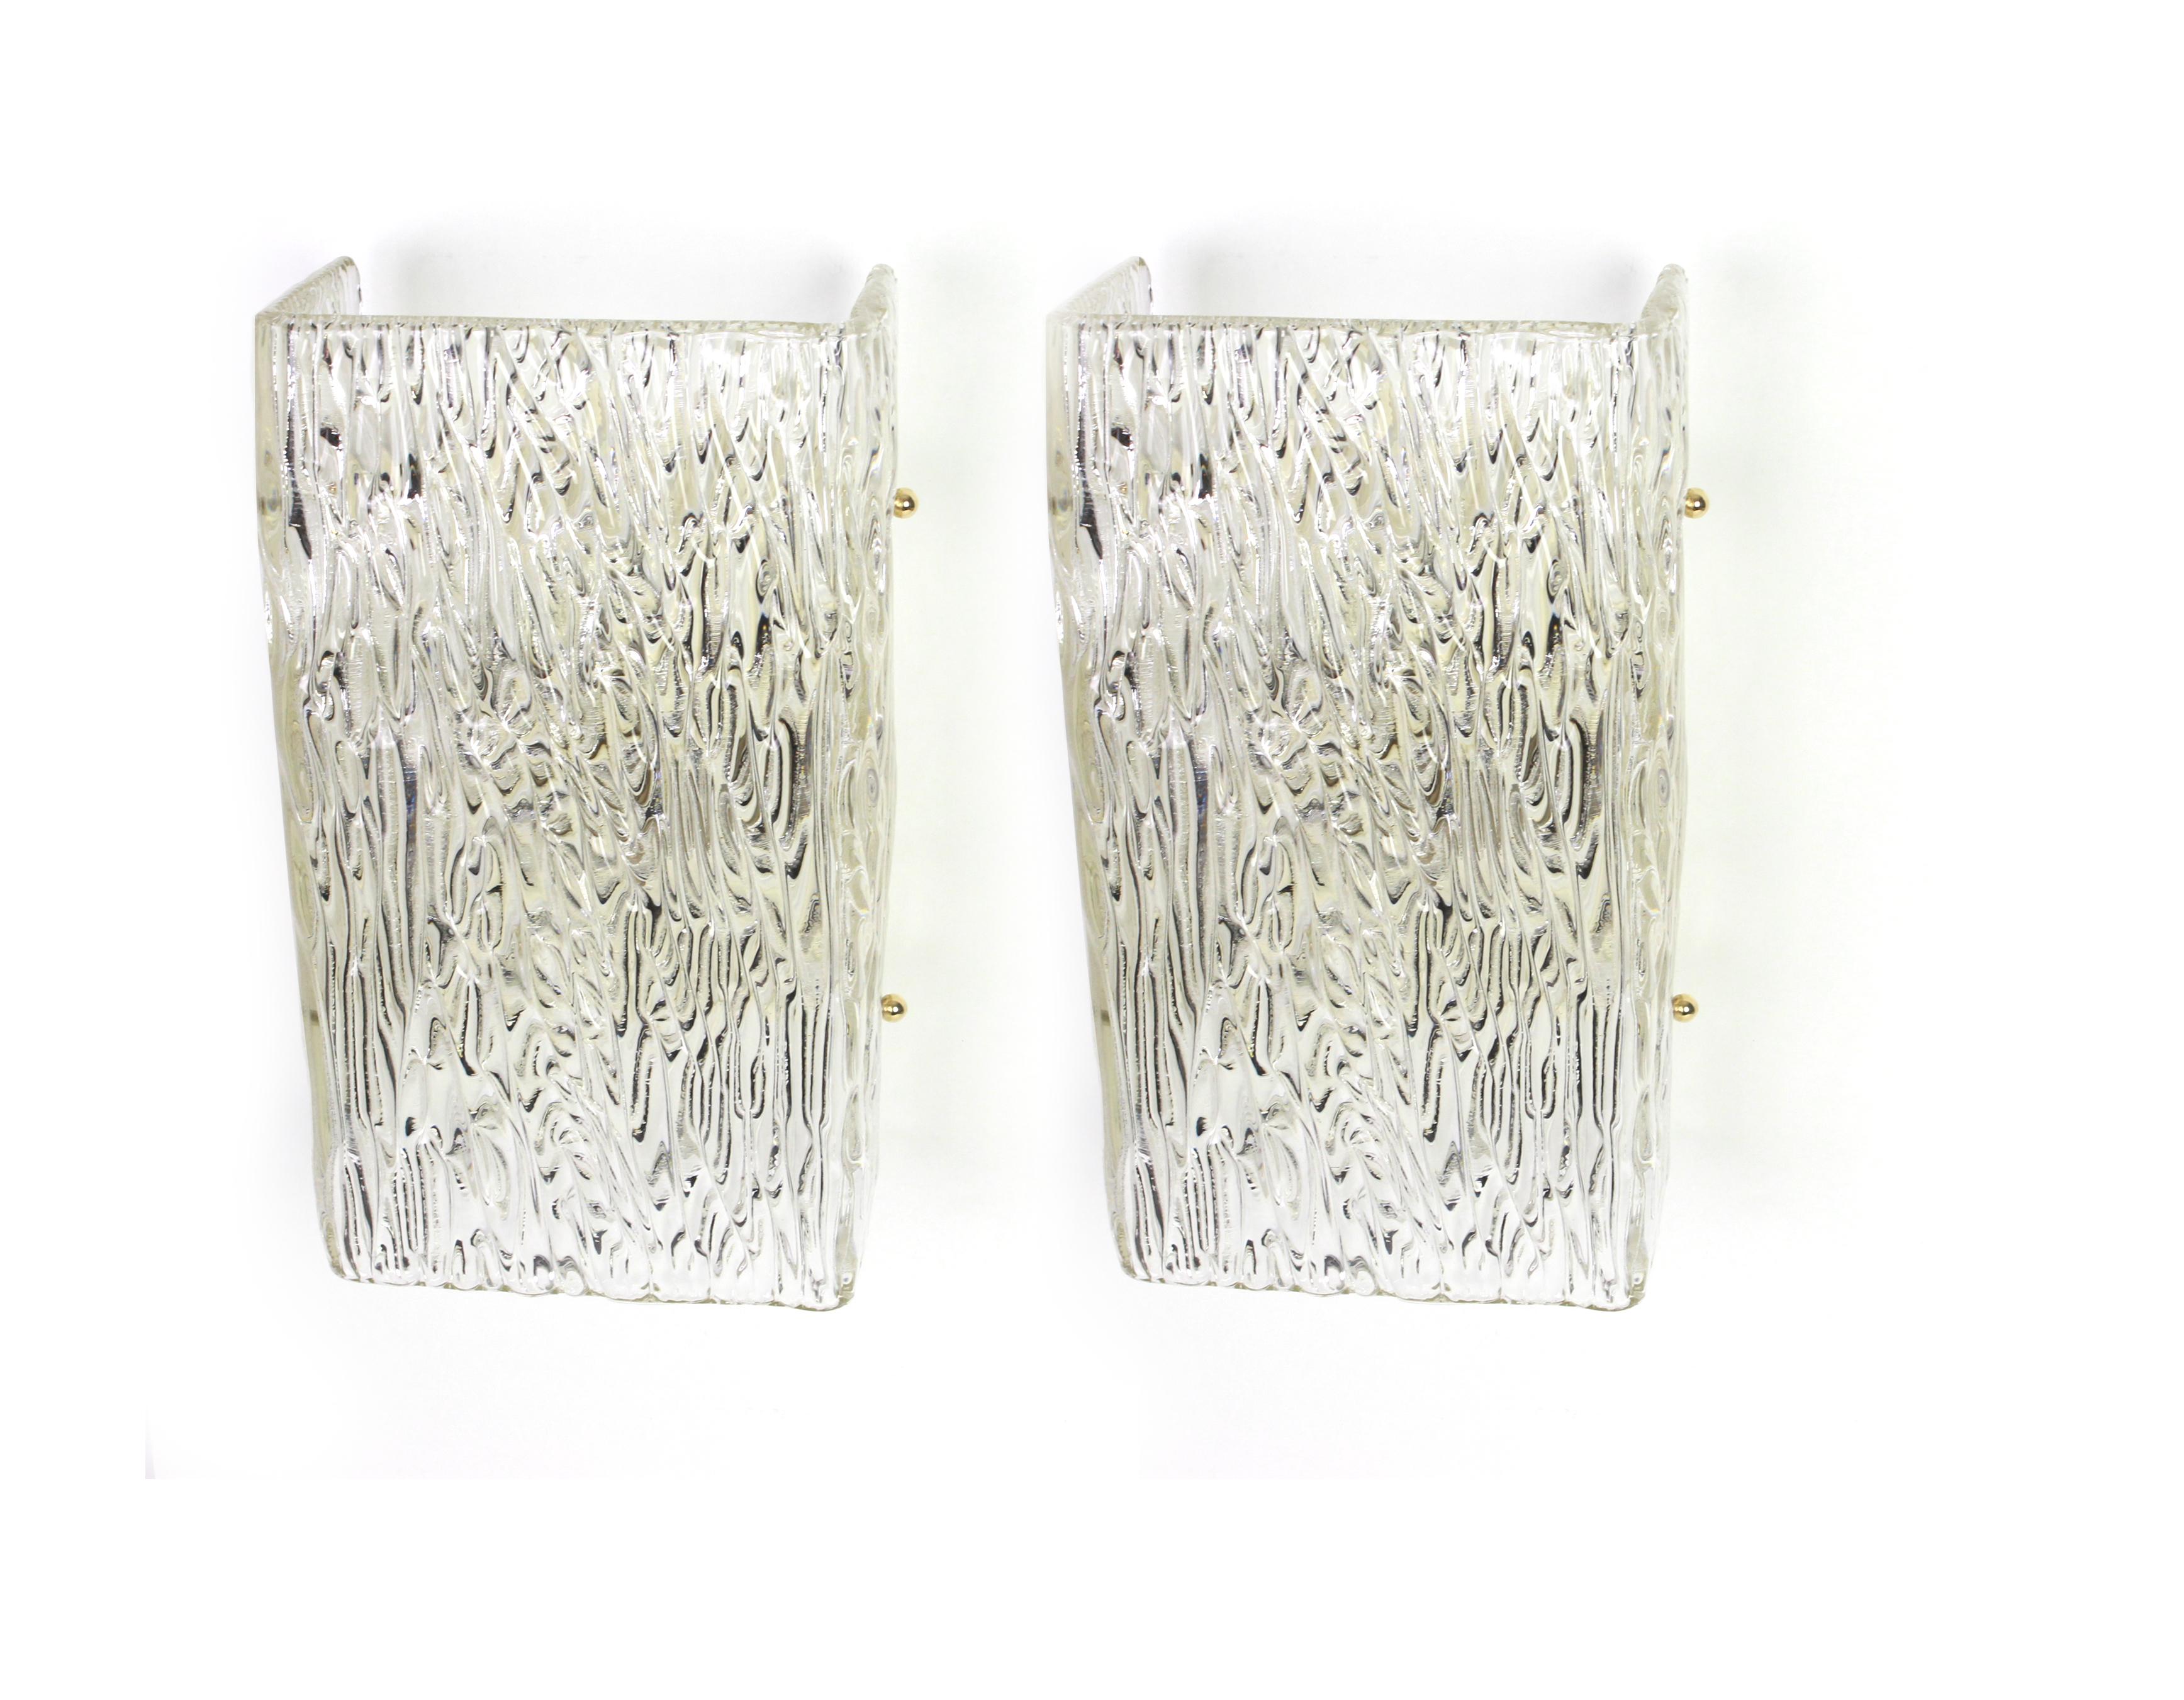 Wonderful pair of midcentury wall sconces with large Murano glass piece on a frame in each wall lamp, made by Kalmar, Austria, manufactured, circa 1960-1969.
Each sconce needs two x E27 standard bulbs.
Light bulbs are not included. It is possible